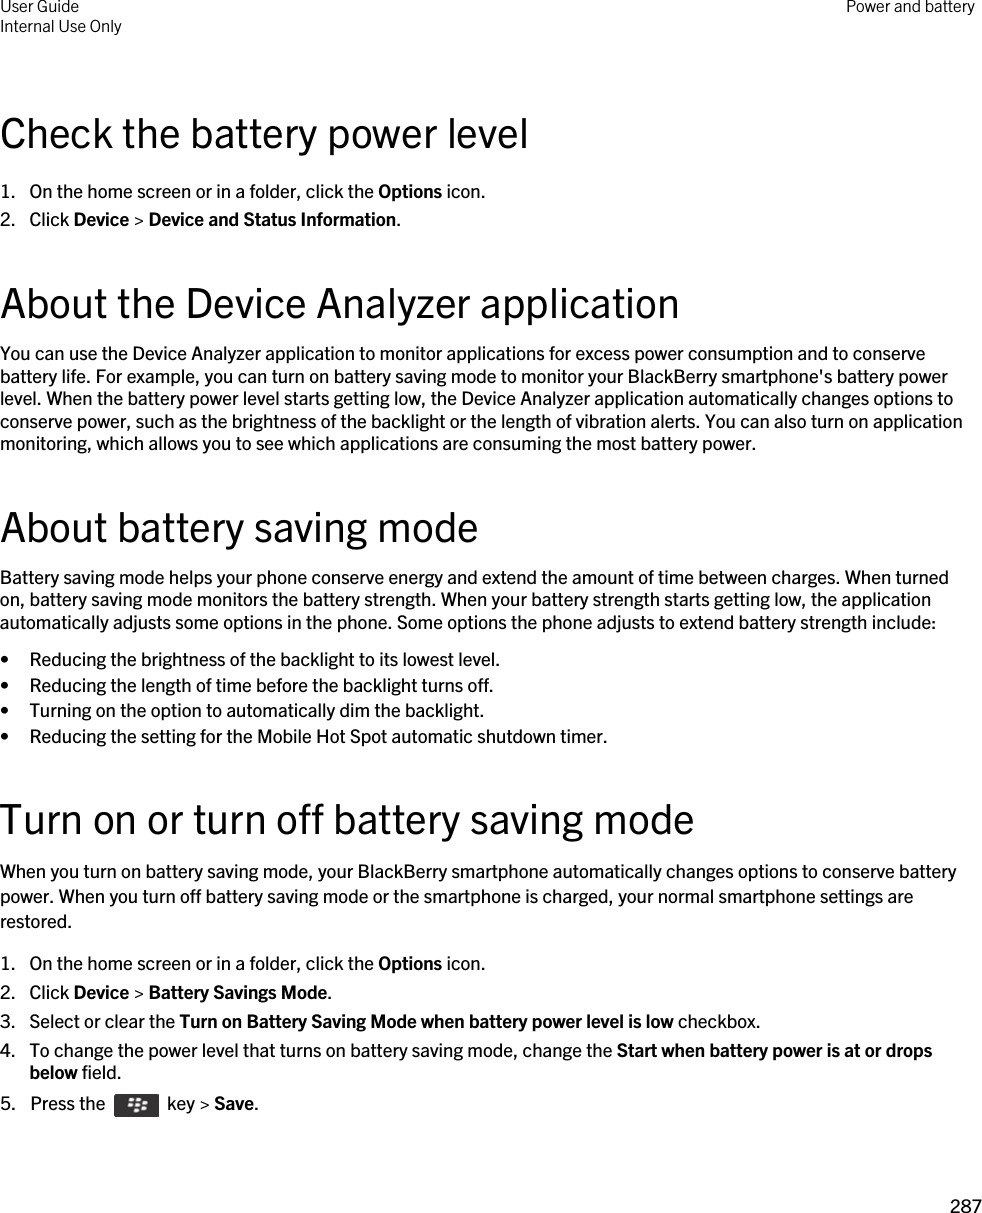 Check the battery power level1. On the home screen or in a folder, click the Options icon.2. Click Device &gt; Device and Status Information.About the Device Analyzer applicationYou can use the Device Analyzer application to monitor applications for excess power consumption and to conserve battery life. For example, you can turn on battery saving mode to monitor your BlackBerry smartphone&apos;s battery power level. When the battery power level starts getting low, the Device Analyzer application automatically changes options to conserve power, such as the brightness of the backlight or the length of vibration alerts. You can also turn on application monitoring, which allows you to see which applications are consuming the most battery power.About battery saving modeBattery saving mode helps your phone conserve energy and extend the amount of time between charges. When turned on, battery saving mode monitors the battery strength. When your battery strength starts getting low, the application automatically adjusts some options in the phone. Some options the phone adjusts to extend battery strength include:• Reducing the brightness of the backlight to its lowest level.• Reducing the length of time before the backlight turns off.• Turning on the option to automatically dim the backlight.• Reducing the setting for the Mobile Hot Spot automatic shutdown timer.Turn on or turn off battery saving modeWhen you turn on battery saving mode, your BlackBerry smartphone automatically changes options to conserve battery power. When you turn off battery saving mode or the smartphone is charged, your normal smartphone settings are restored.1. On the home screen or in a folder, click the Options icon.2. Click Device &gt; Battery Savings Mode.3. Select or clear the Turn on Battery Saving Mode when battery power level is low checkbox.4. To change the power level that turns on battery saving mode, change the Start when battery power is at or drops below field.5.  Press the    key &gt; Save. User GuideInternal Use Only Power and battery287 